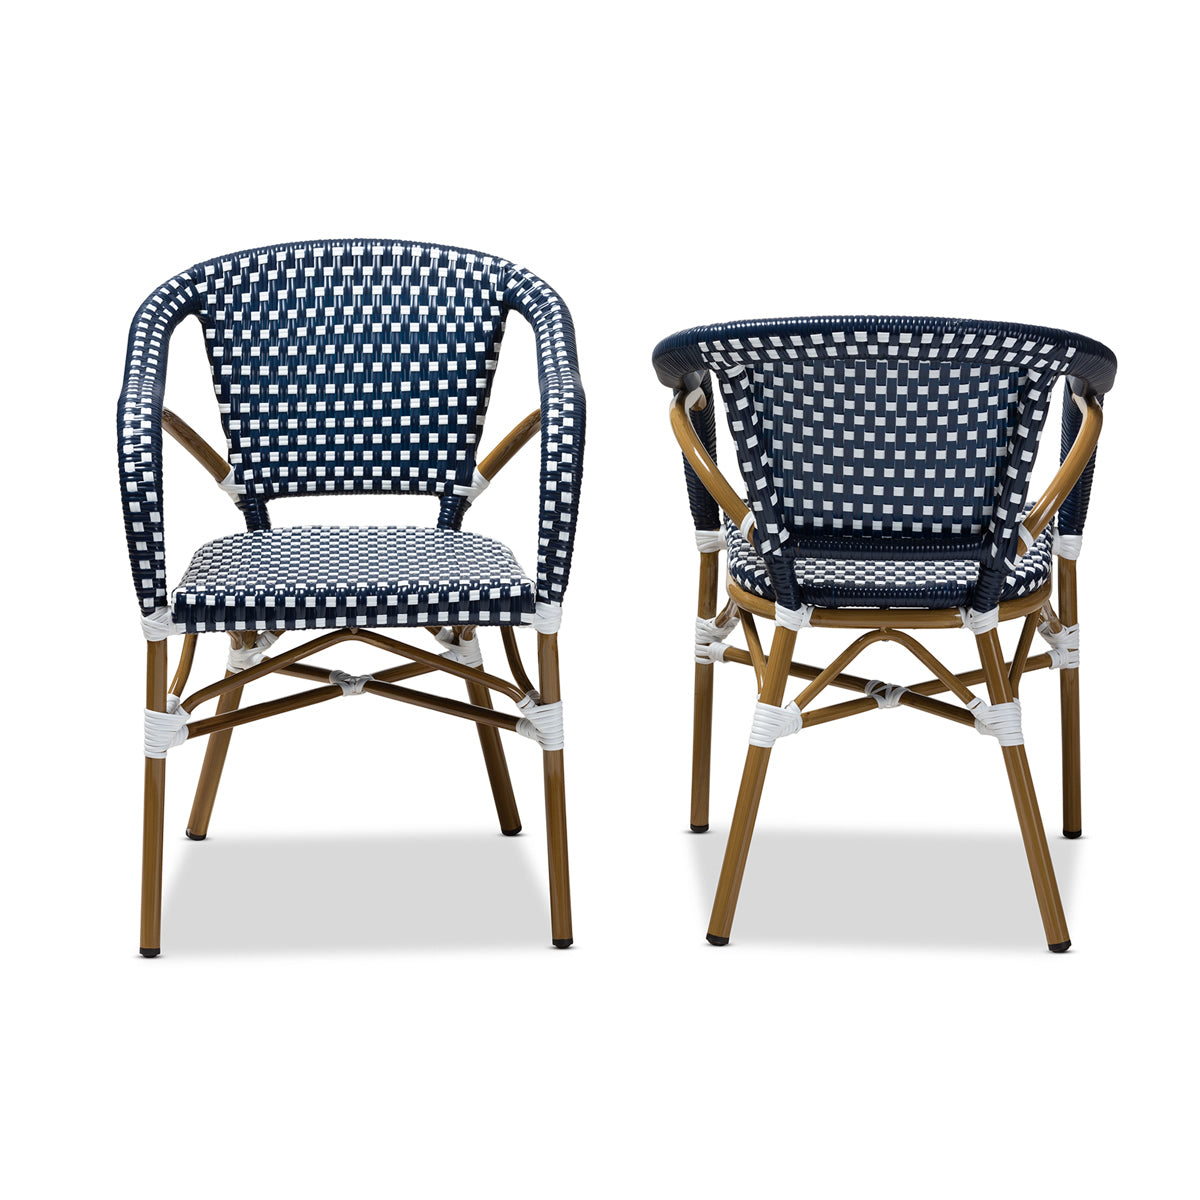 Baxton Studio Eliane Classic French Indoor and Outdoor Navy and White Bamboo Style Stackable Bistro Dining Chair Set of 2 Baxton Studio-dining chair-Minimal And Modern - 2